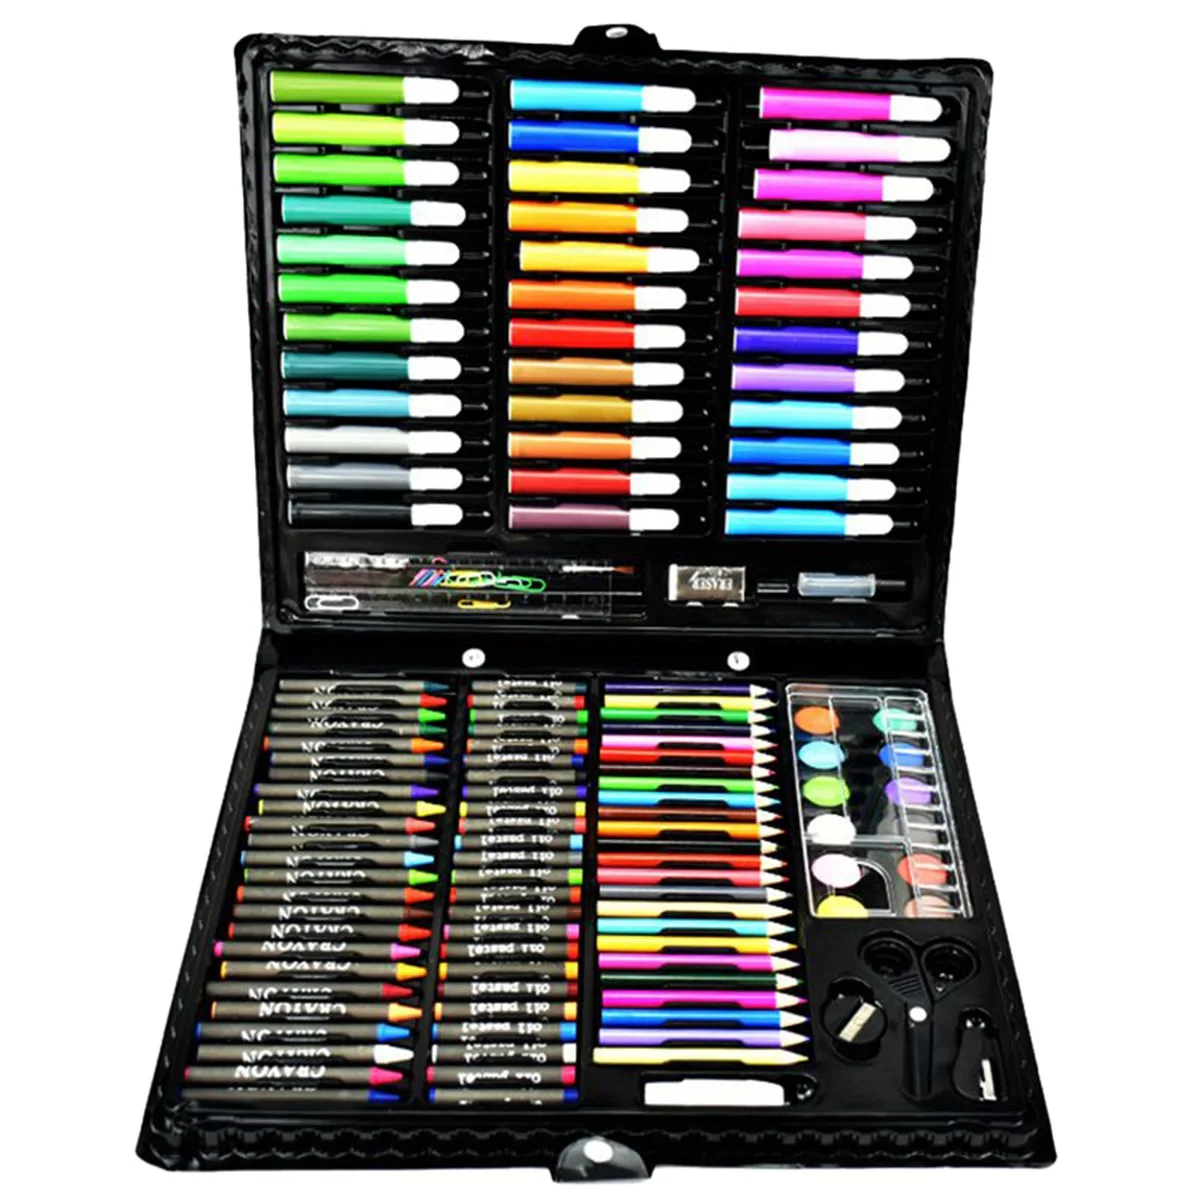 

PPYY NEW -Deluxe Art Set,150Pcs Children'S Drawing Painting Sketching Tools Set Watercolor Pen Crayon Oil Pastel Paint Brush D